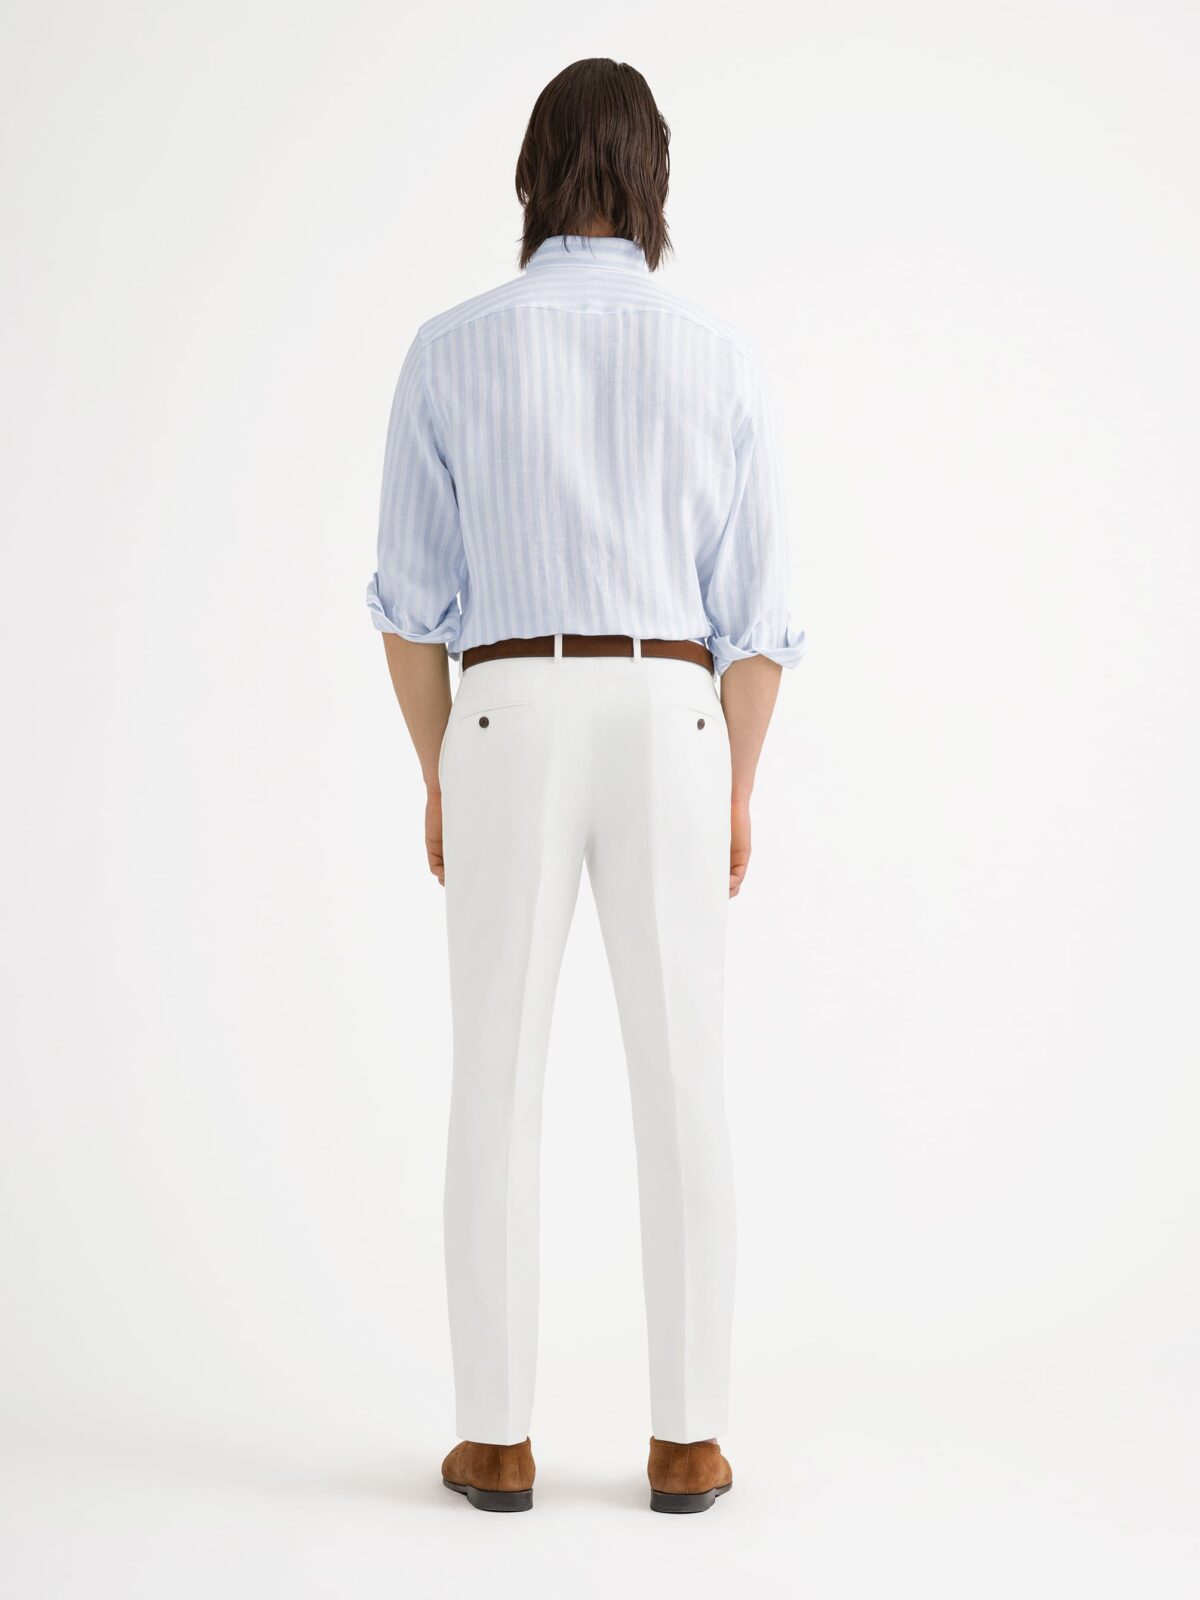 9 pairs of white pants for men: J.Crew, Levi's and more - Reviewed